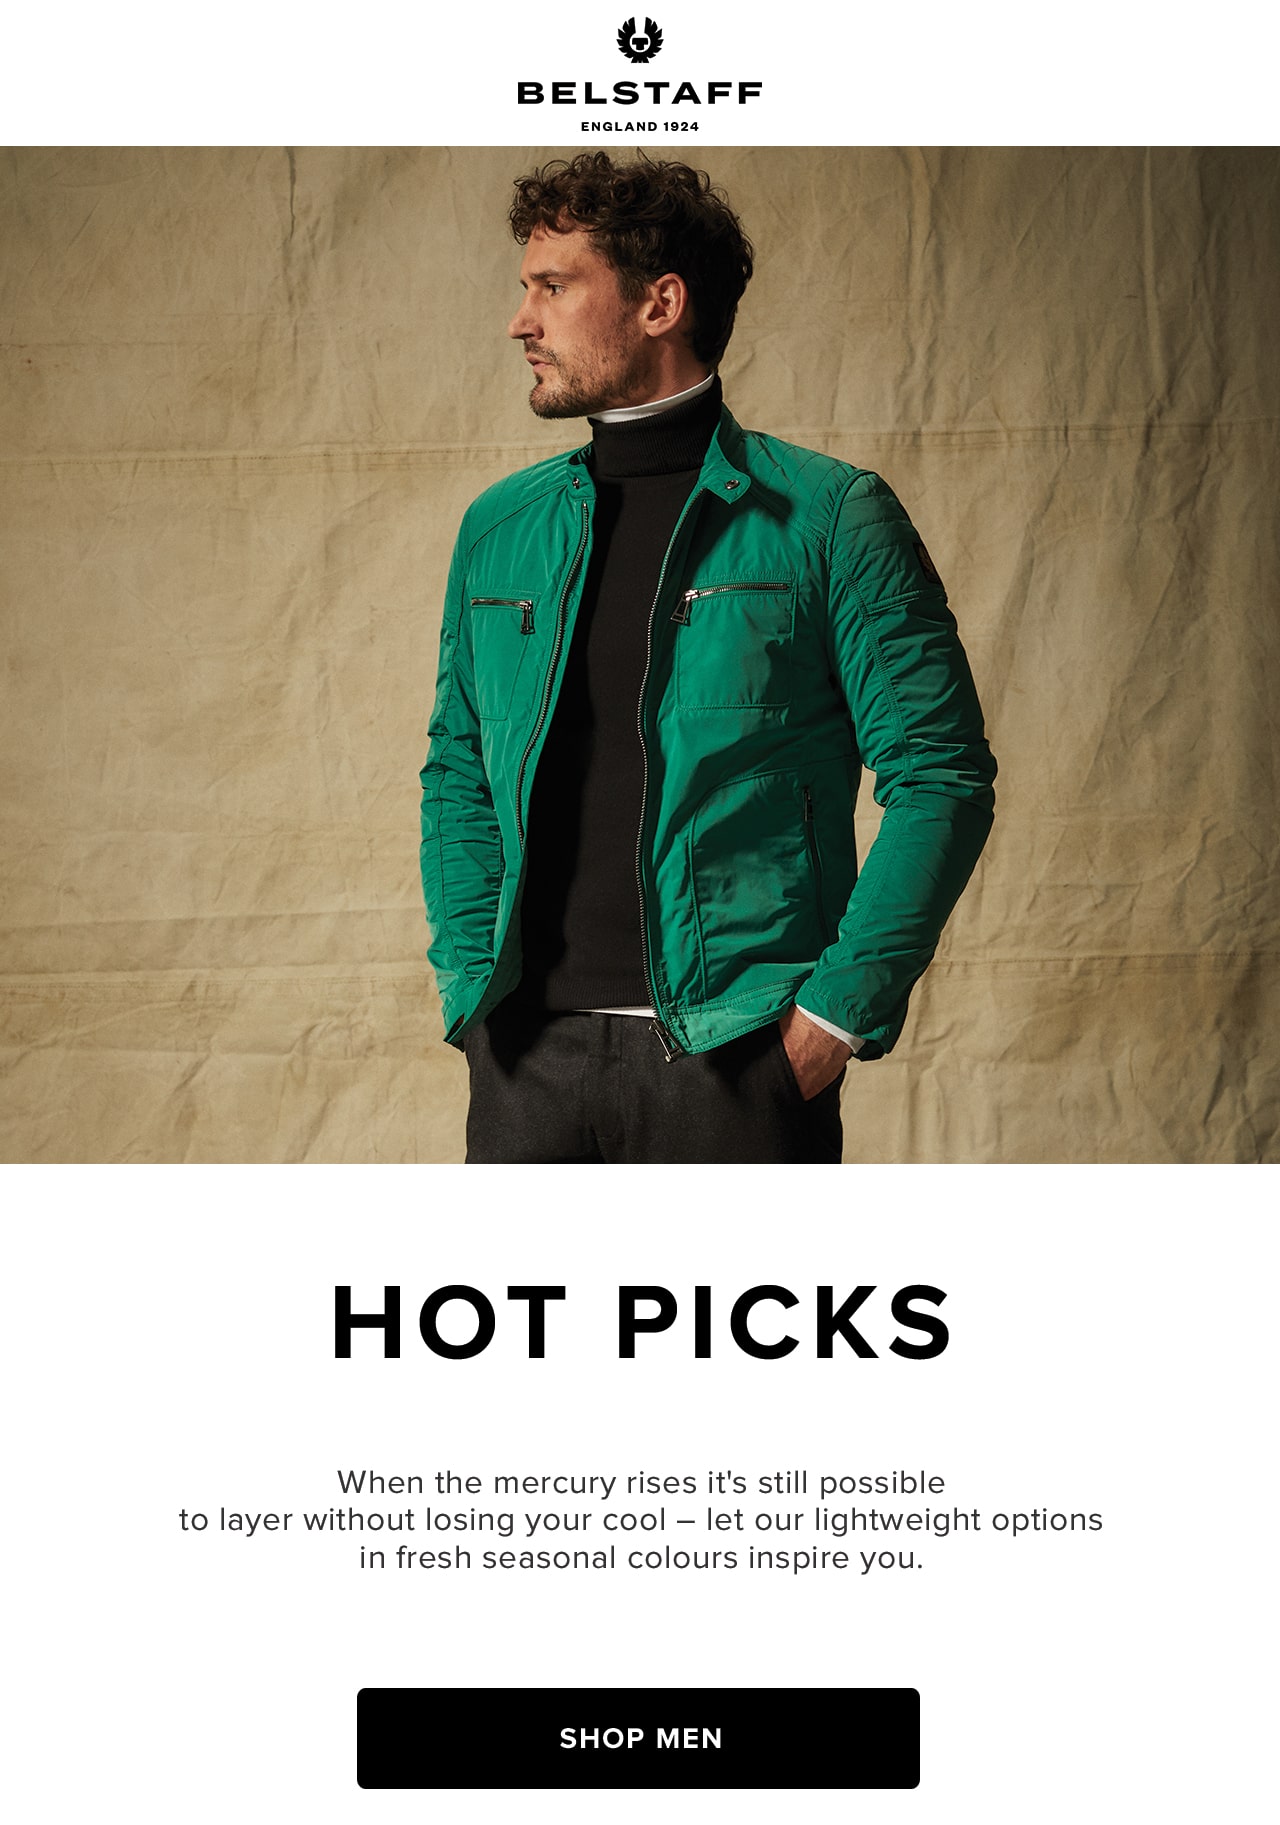 When the mercury rises it''s still possible to layer without losing your cool - let our lightweight options in fresh seasonal colours inspire you.